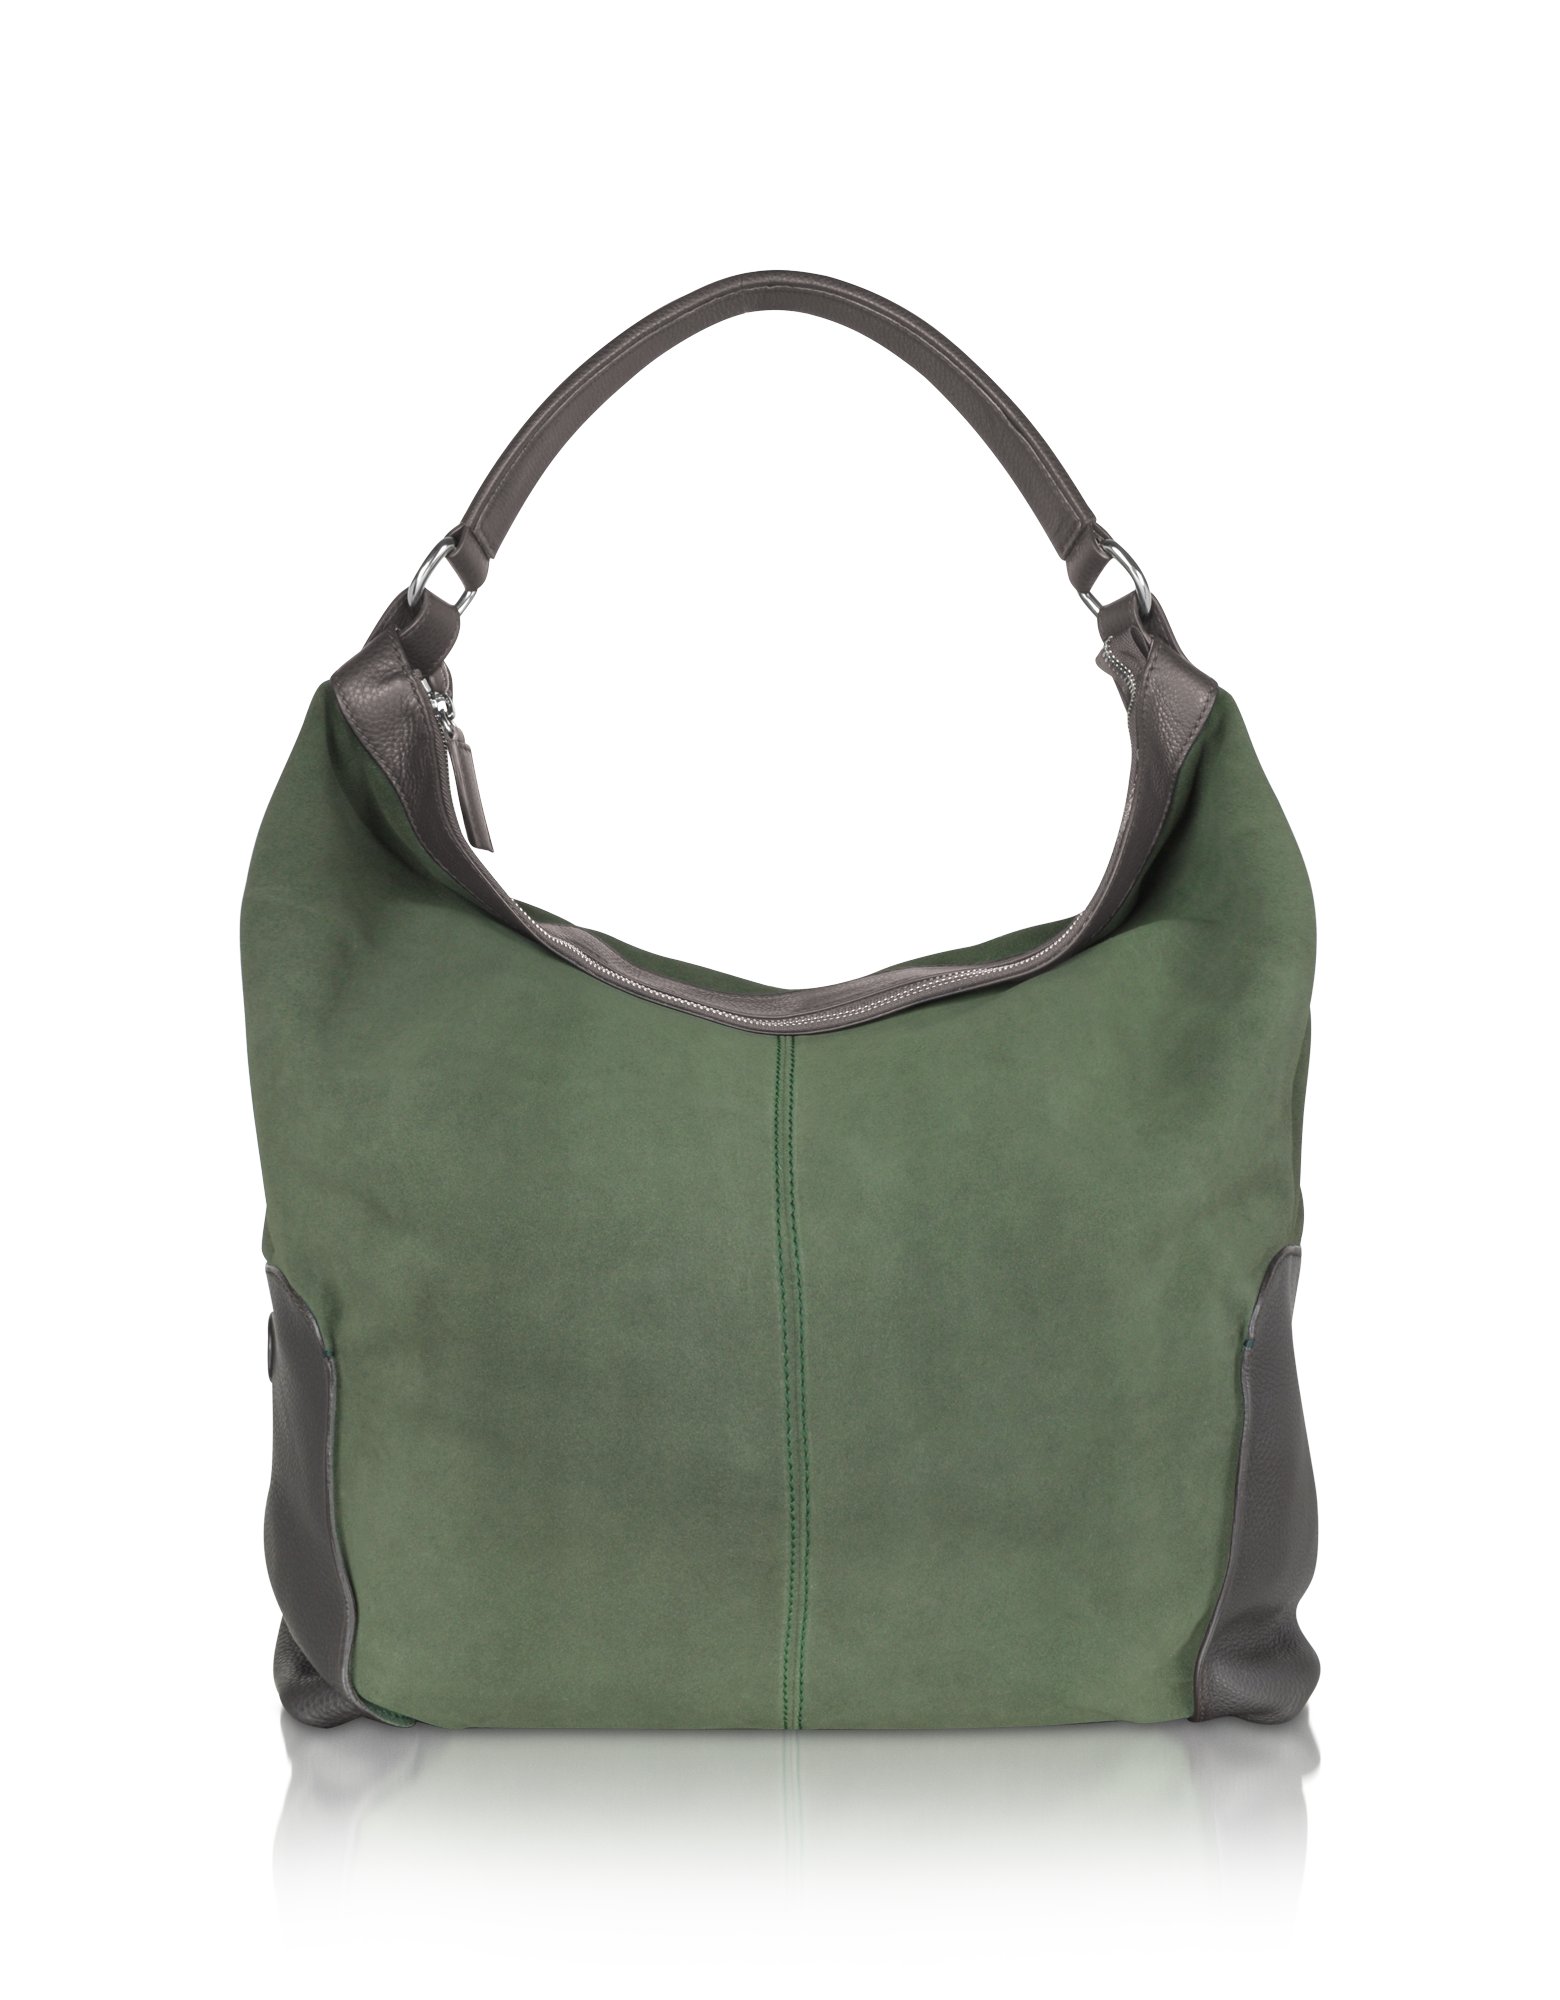 Giordano Frangipani Suede and Leather Hobo Bag in Green | Lyst